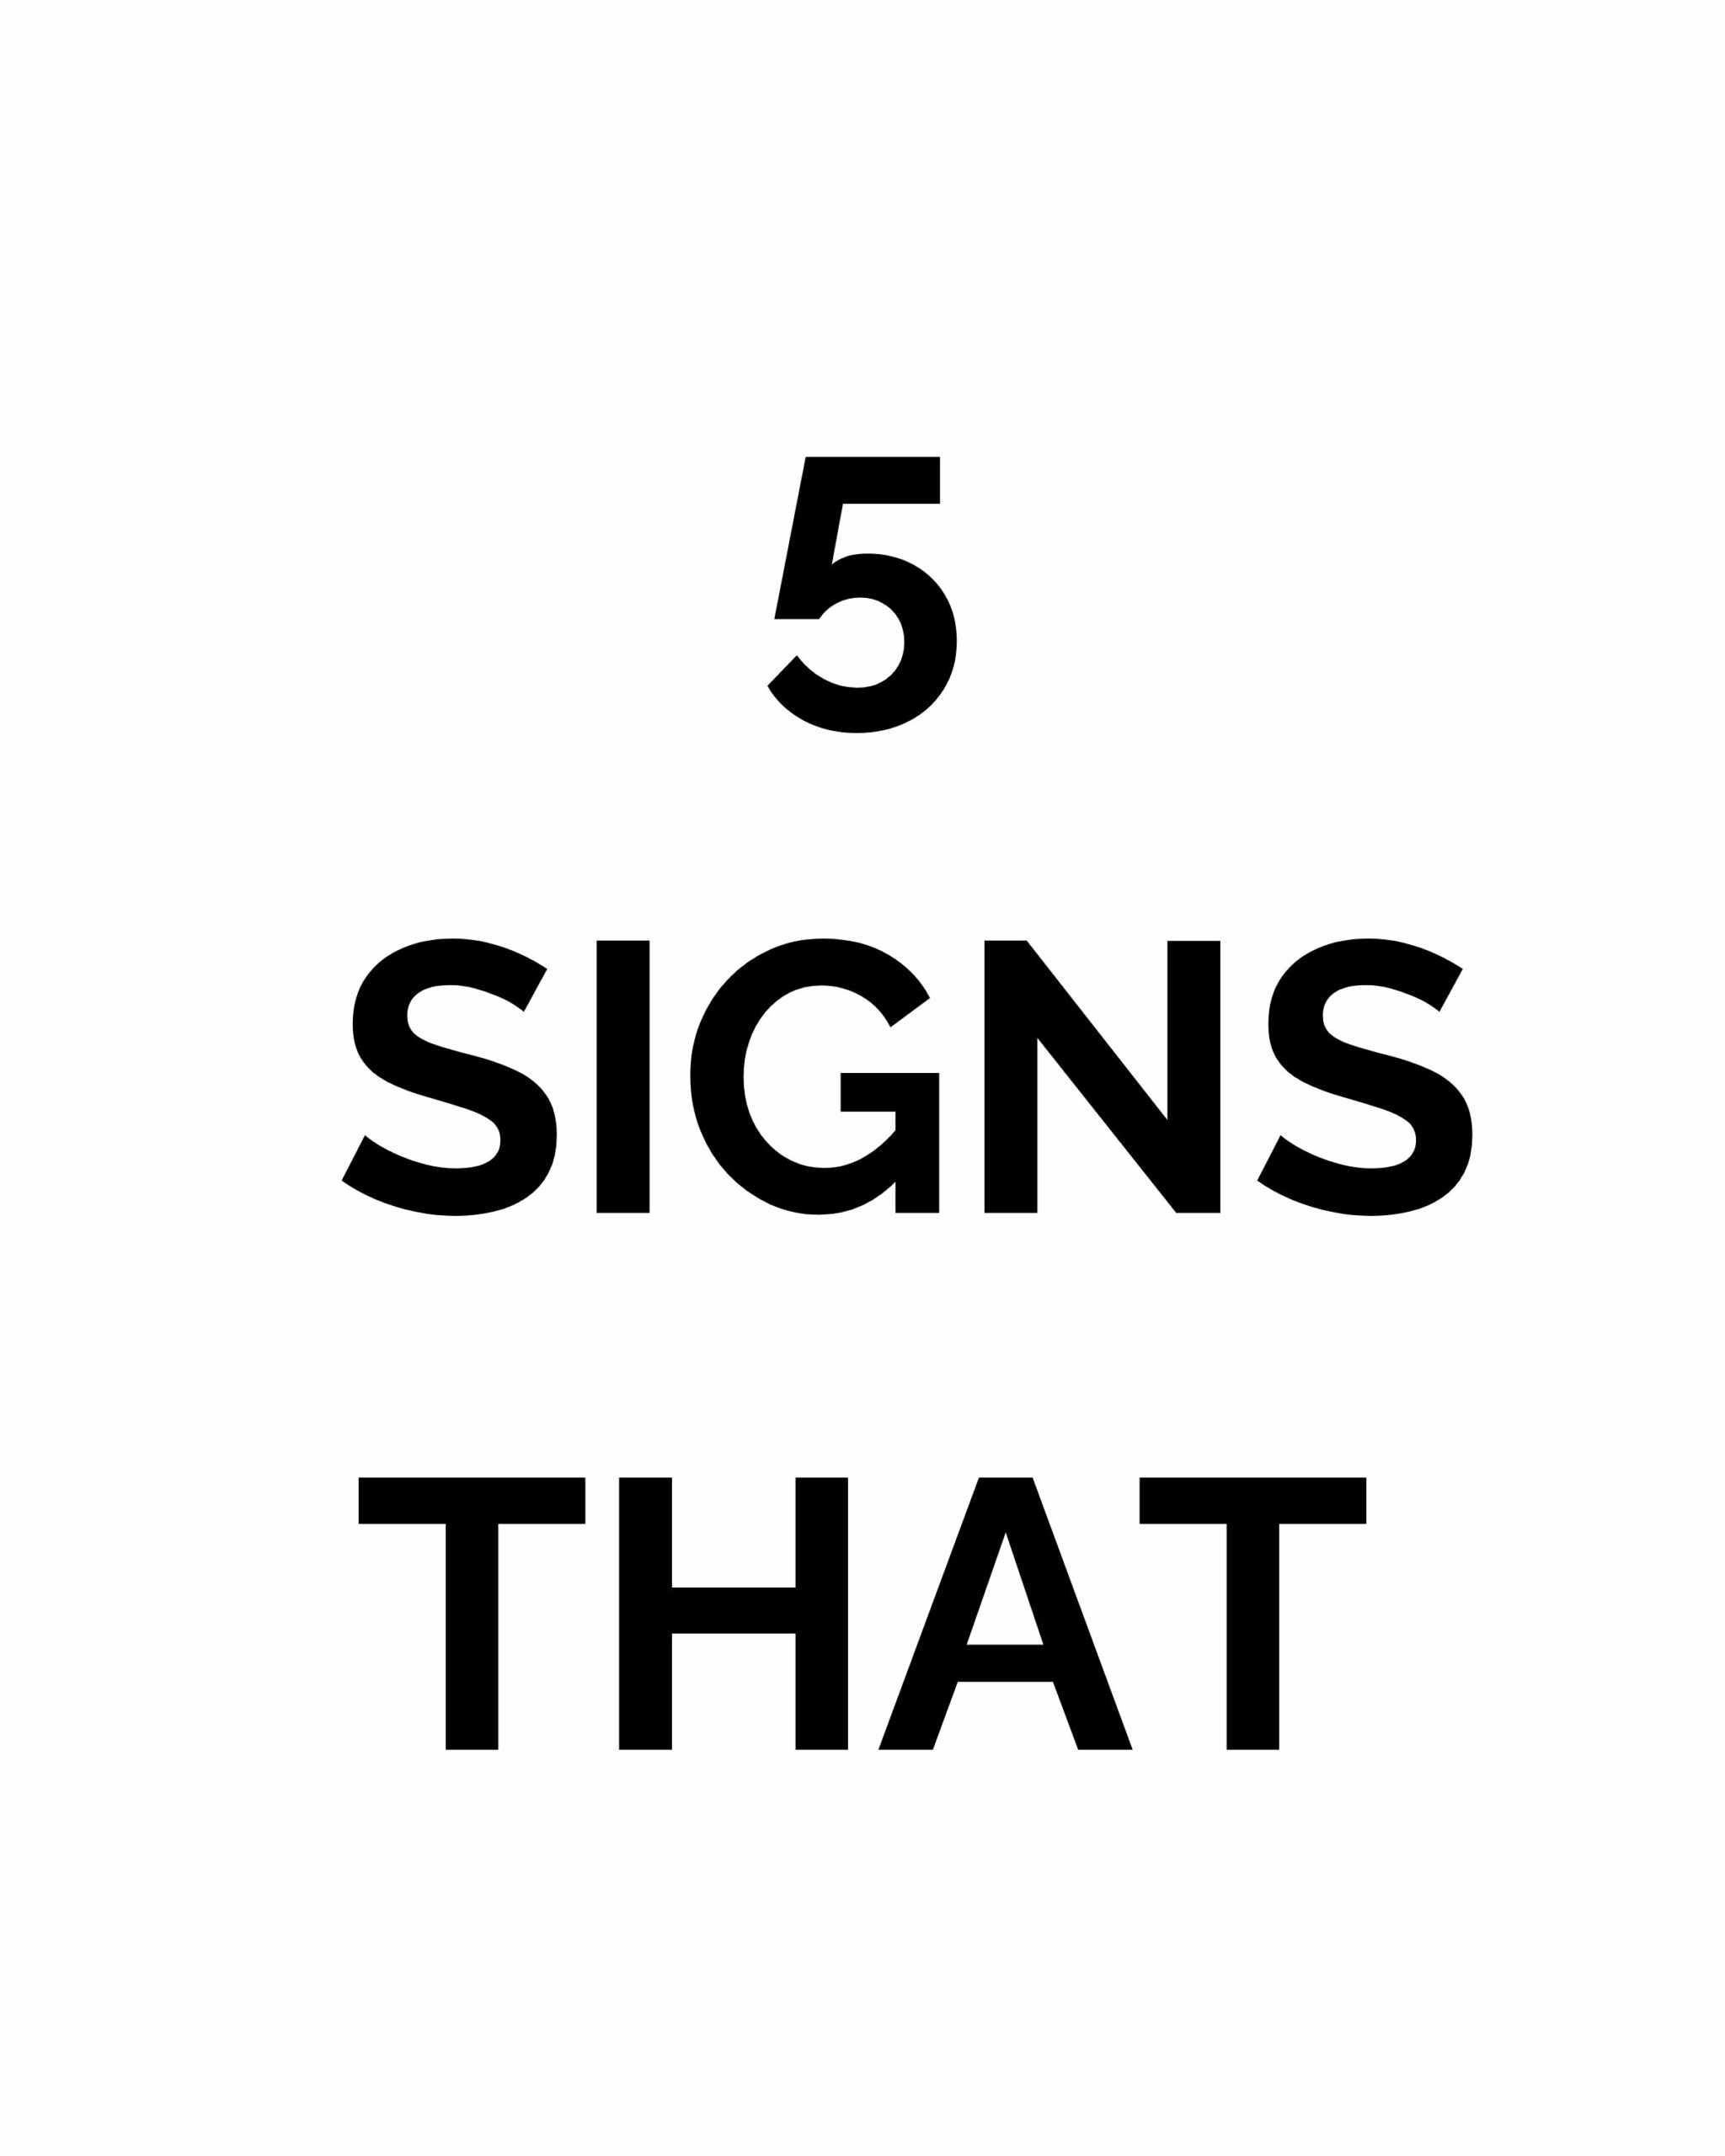 5 Signs That You’re Secretly More Successful Than Your Friends… 😉 Find Out the Signs and Get Ready for Some Serious Validation!